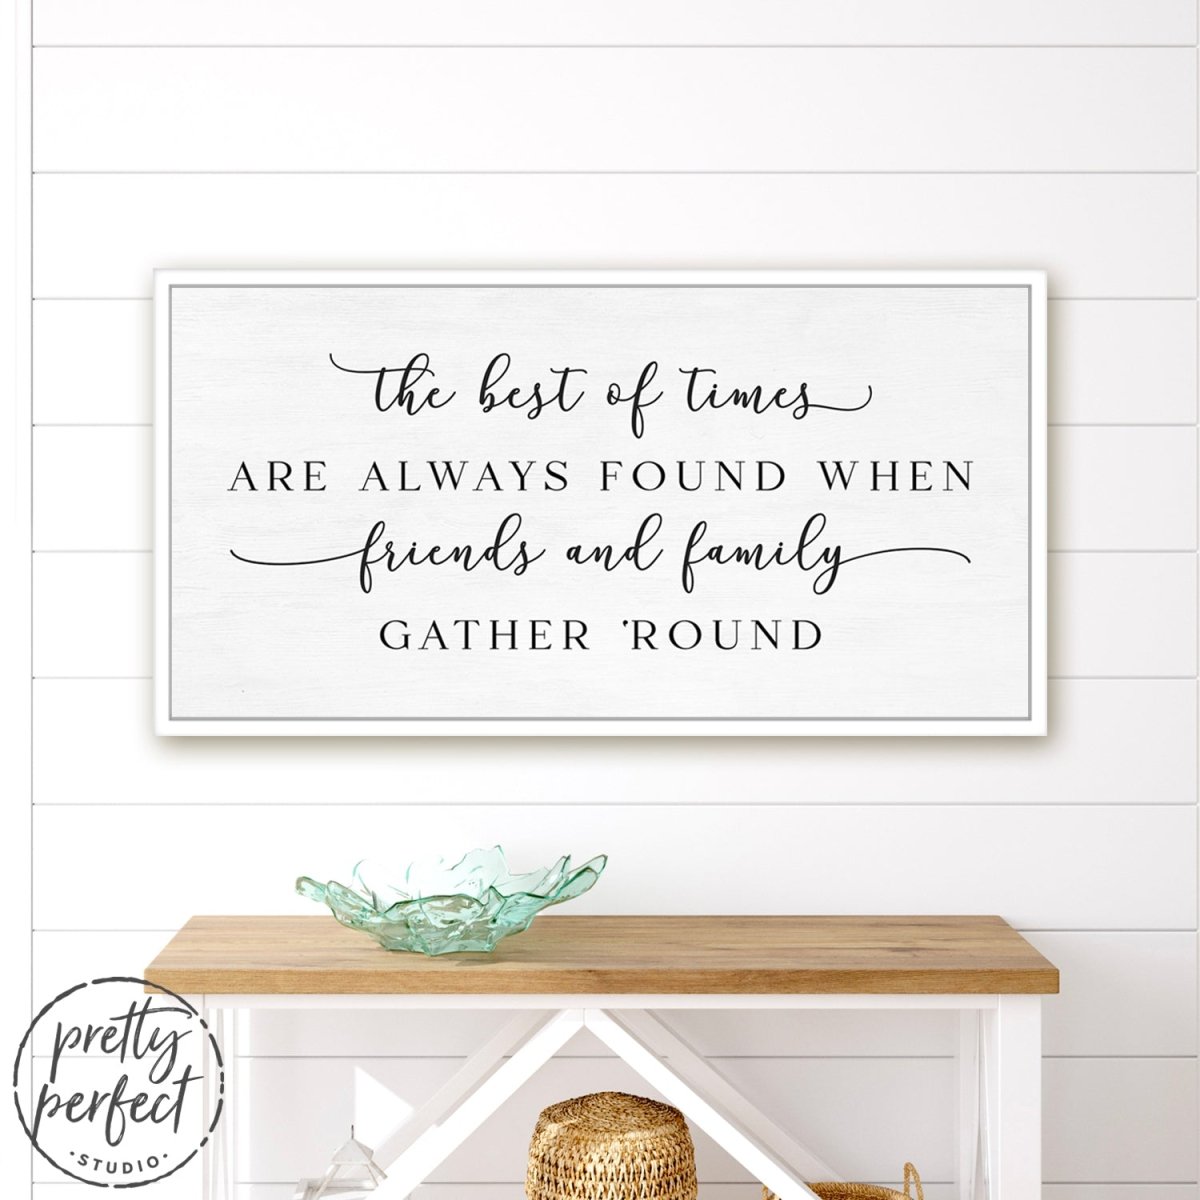 The Best Of Times Sign Hanging in Entryway Above Table - Pretty Perfect Studio